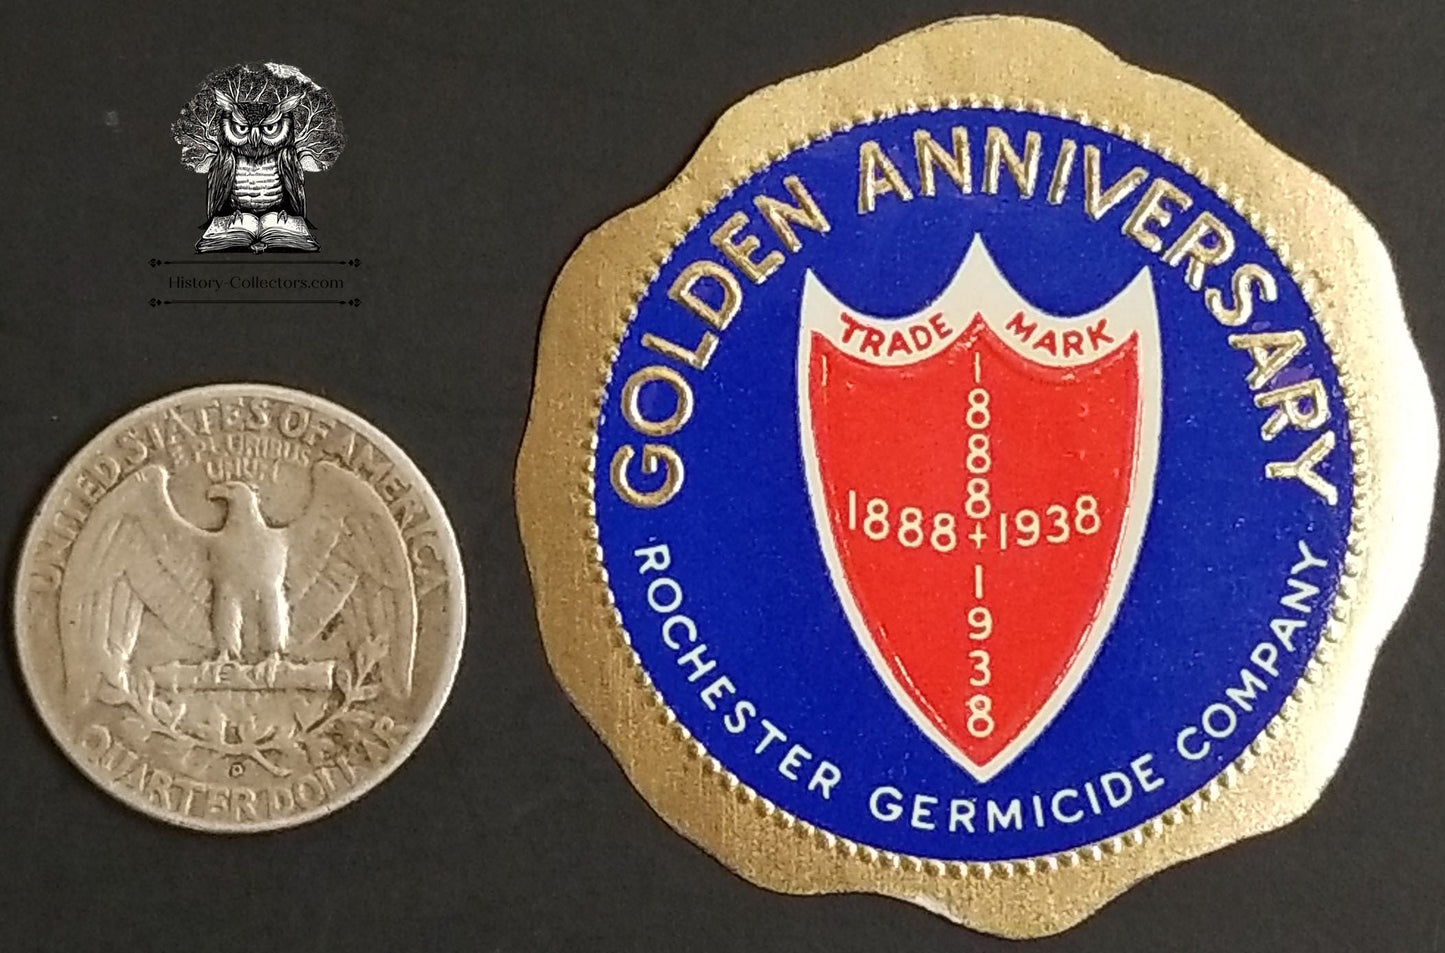 1938 Rochester Germicide Company Golden Anniversary Exhibition Advertising Seal - New York